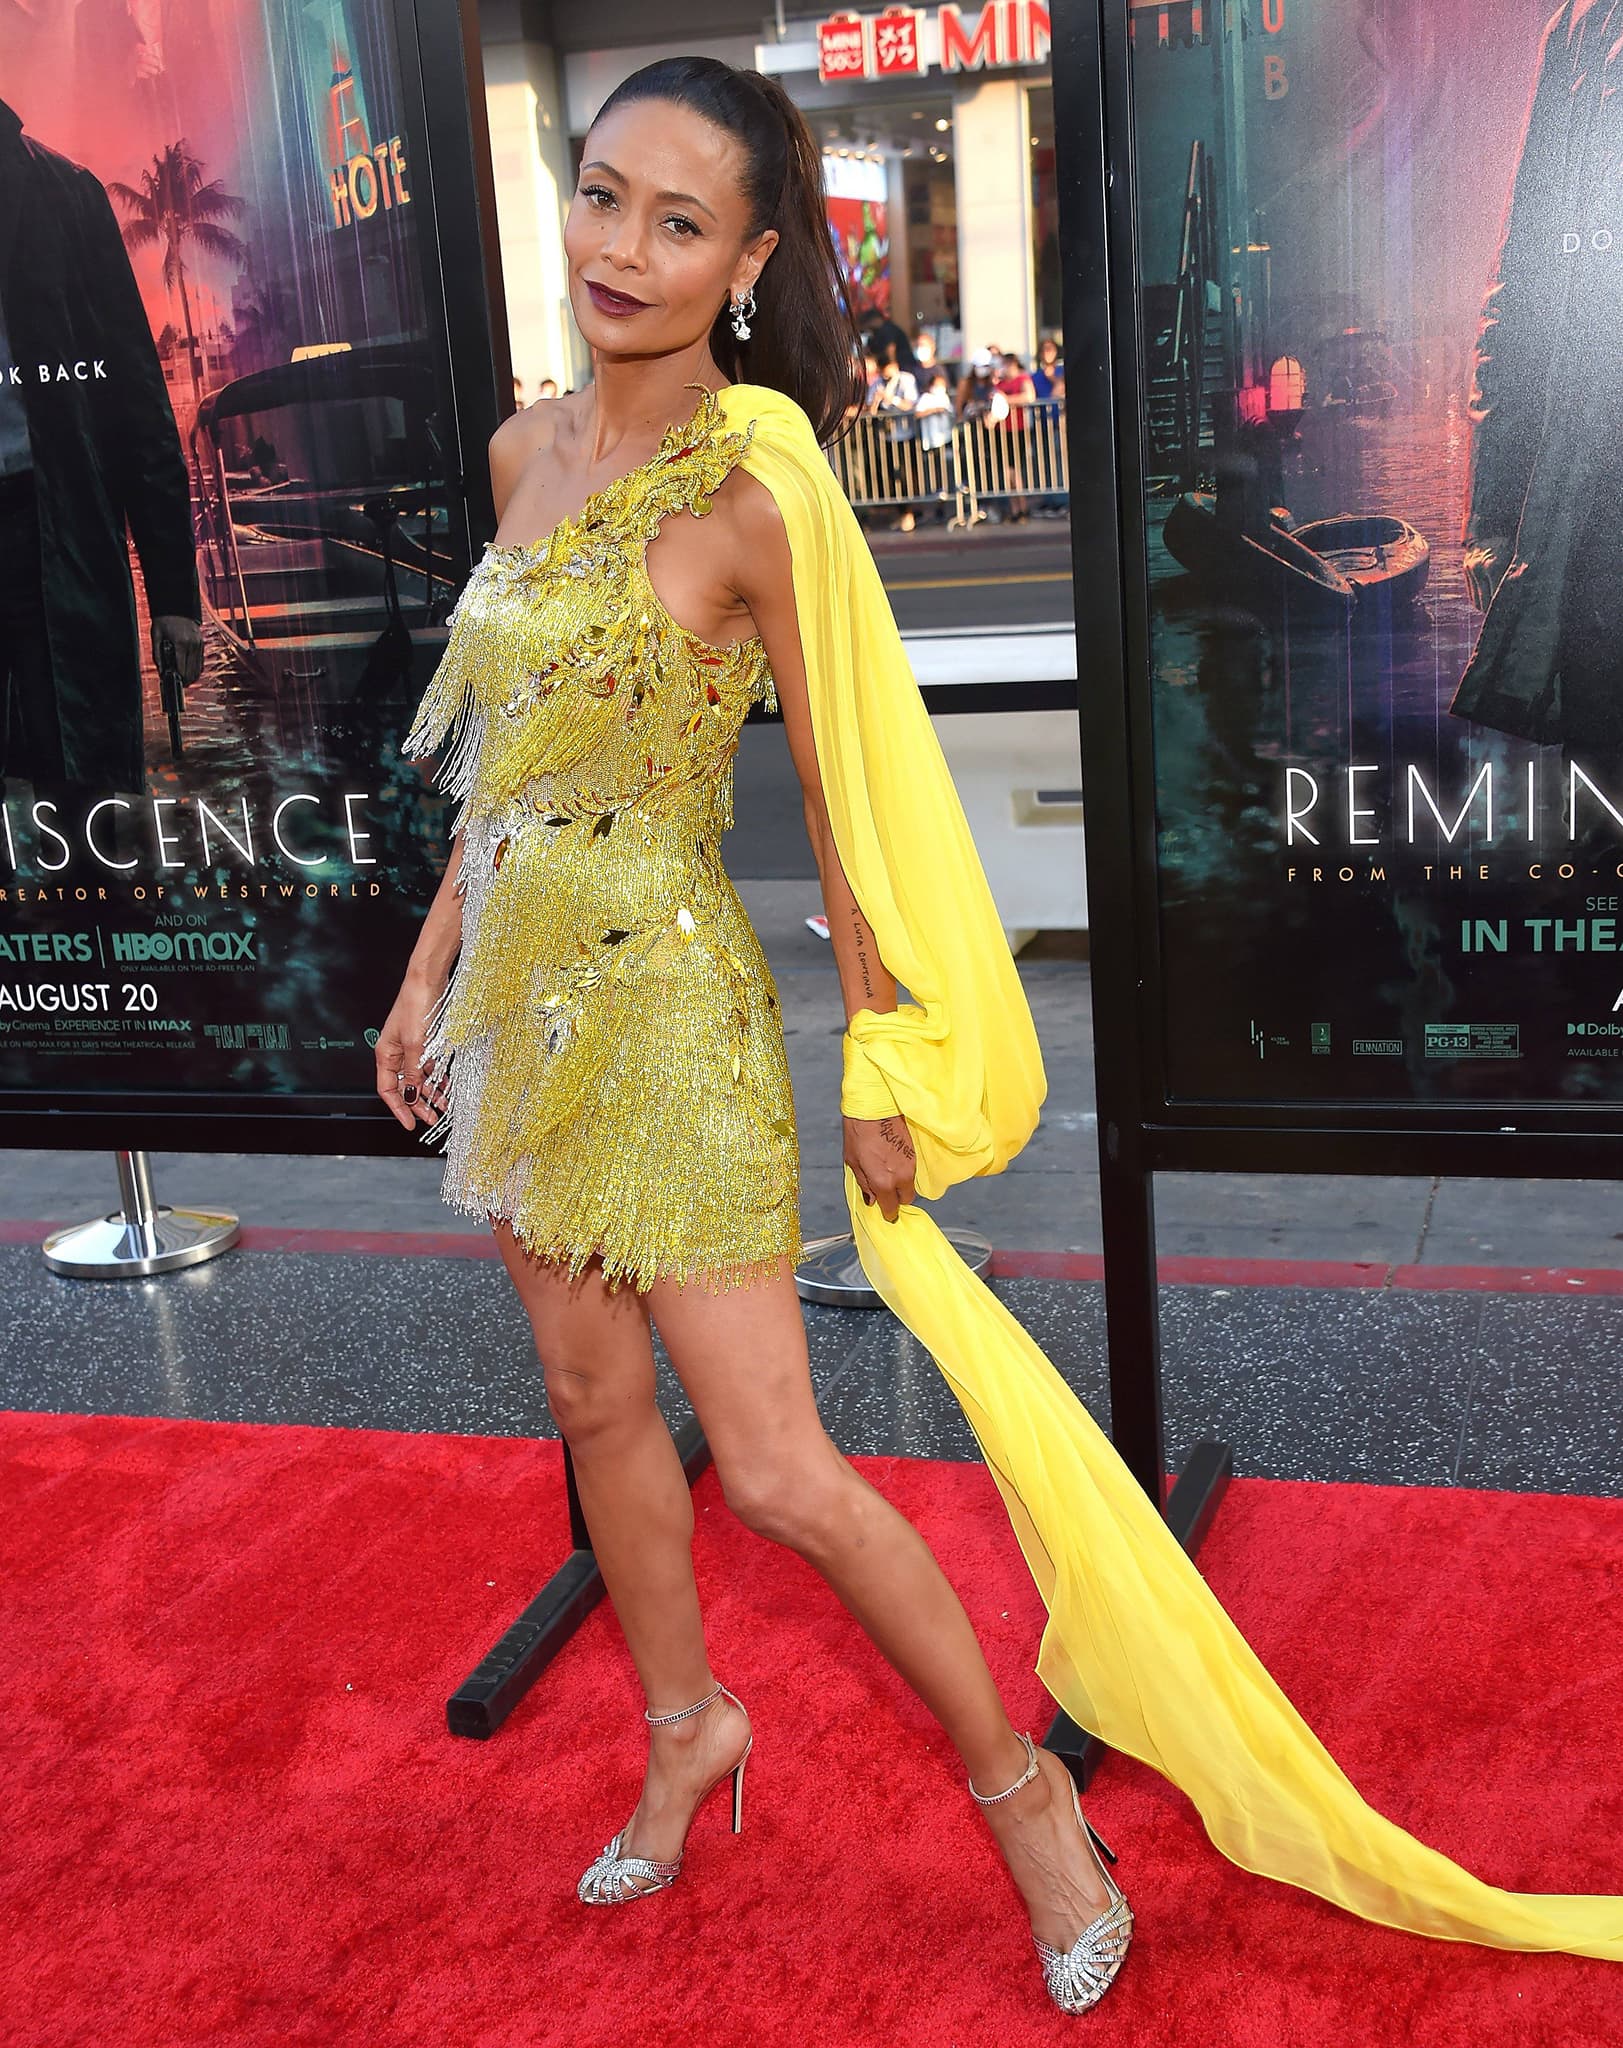 Thandiwe Newton stuns in a silver-and-gold fringe mini dress from Atelier Versace